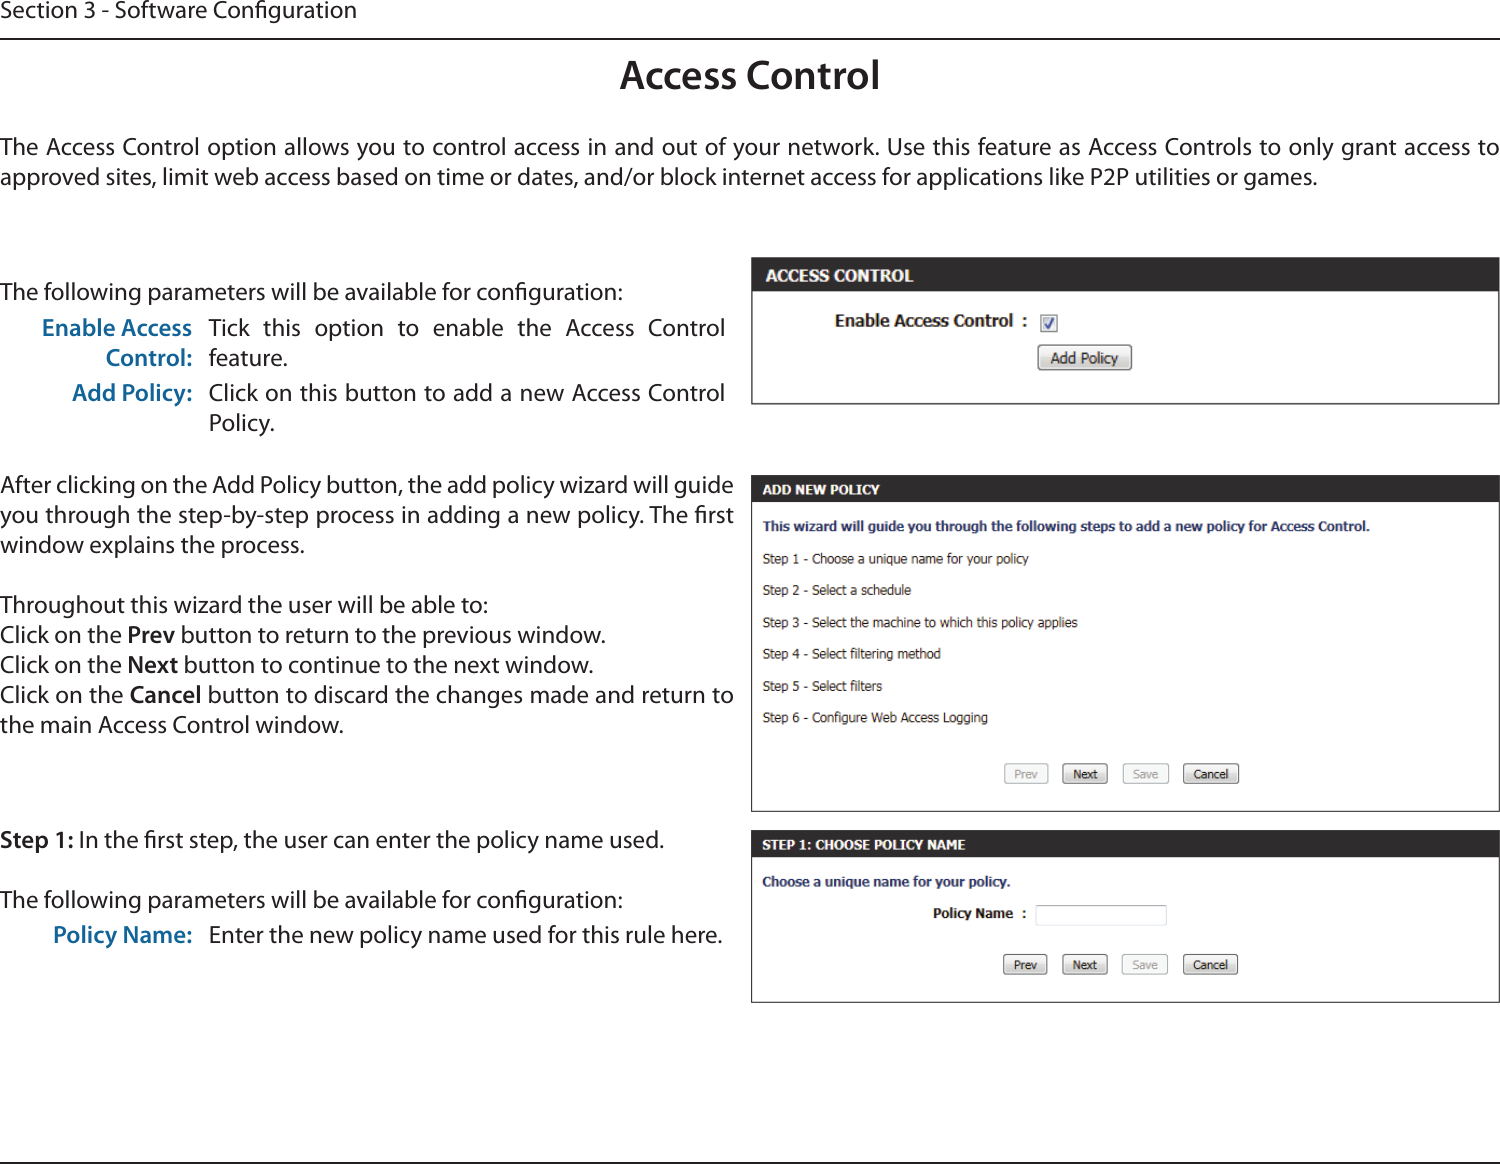 Section 3 - Software CongurationAccess ControlThe Access Control option allows you to control access in and out of your network. Use this feature as Access Controls to only grant access to approved sites, limit web access based on time or dates, and/or block internet access for applications like P2P utilities or games.The following parameters will be available for conguration:Enable Access Control:Tick  this  option  to  enable  the  Access  Control feature.Add Policy: Click on this button to add a new Access Control Policy.After clicking on the Add Policy button, the add policy wizard will guide you through the step-by-step process in adding a new policy. The rst window explains the process.Throughout this wizard the user will be able to:Click on the Prev button to return to the previous window.Click on the Next button to continue to the next window.Click on the Cancel button to discard the changes made and return to the main Access Control window.Step 1: In the rst step, the user can enter the policy name used.The following parameters will be available for conguration:Policy Name: Enter the new policy name used for this rule here.